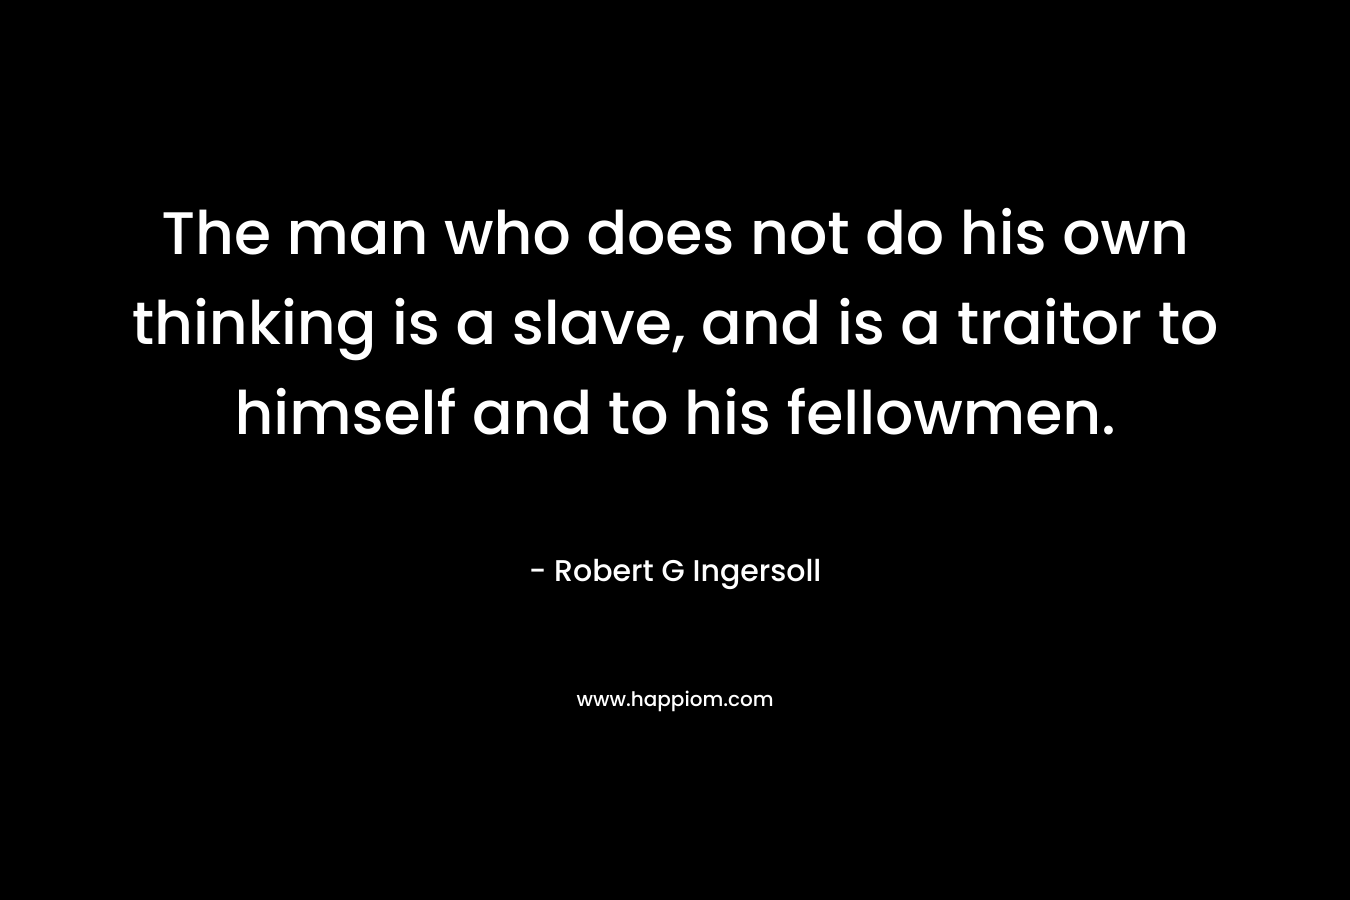 The man who does not do his own thinking is a slave, and is a traitor to himself and to his fellowmen. – Robert G Ingersoll